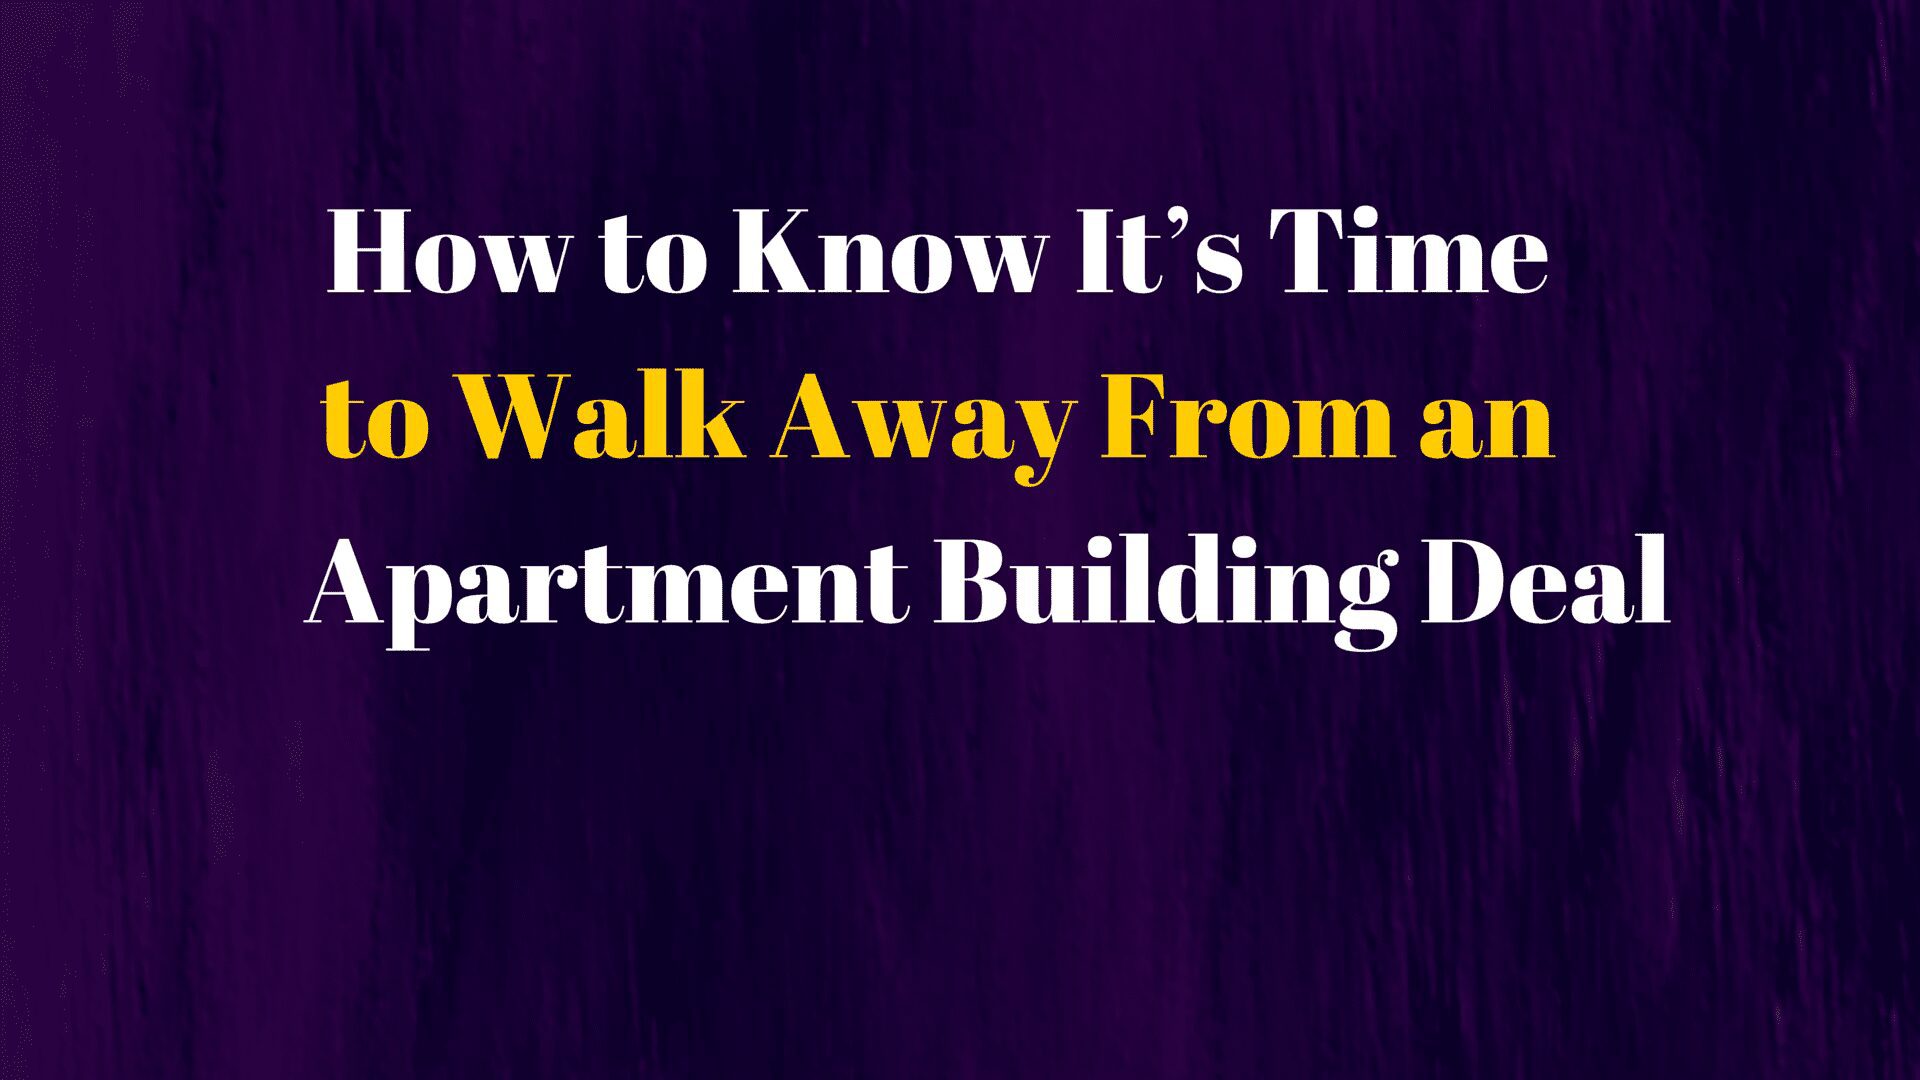 How to Know It’s Time to Walk Away From an Apartment Building Deal